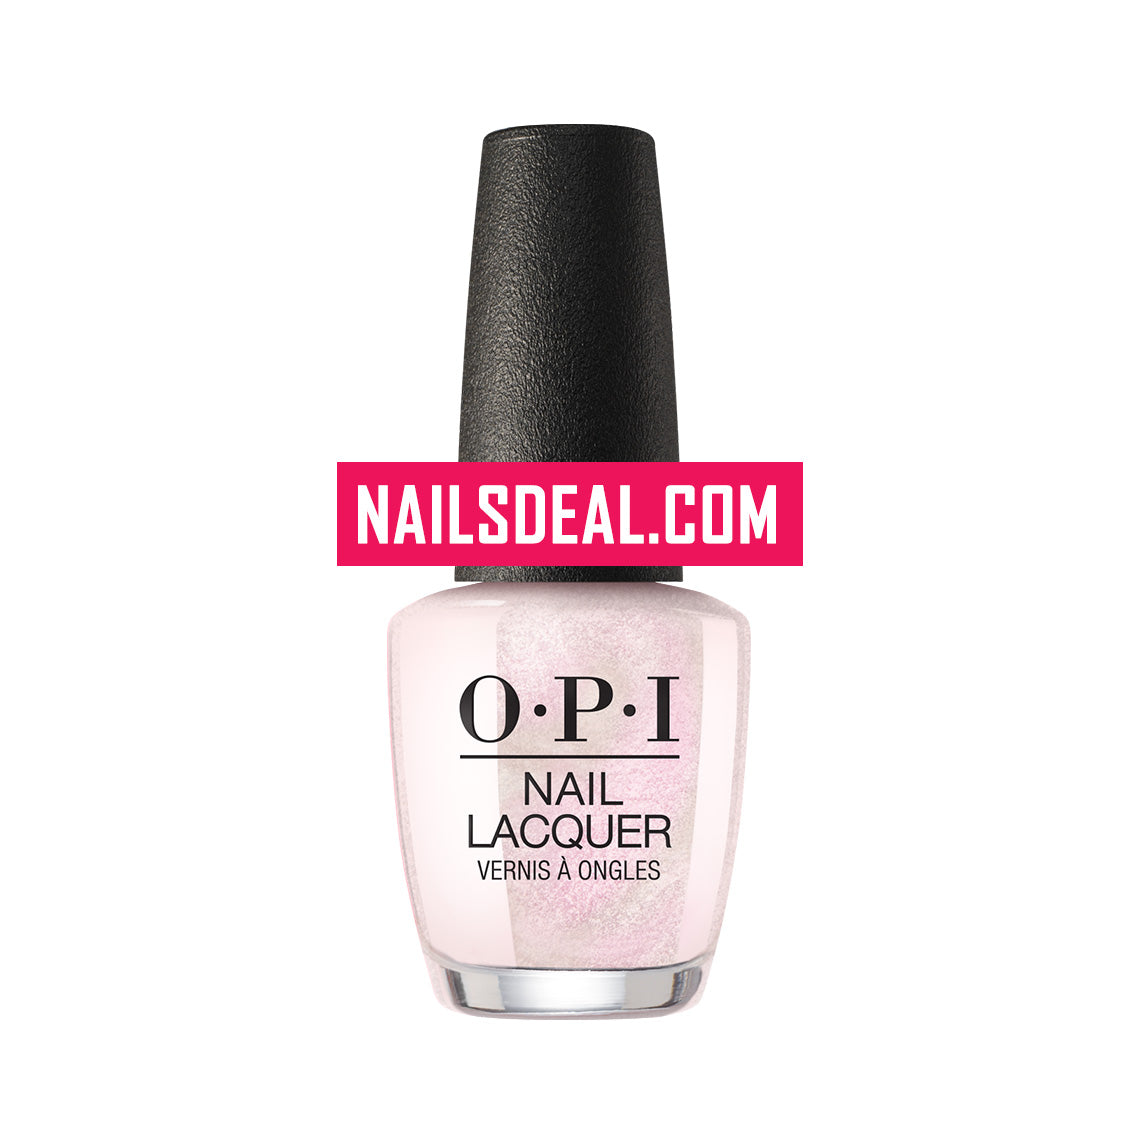 OPI Lacquer - Throw Me a Kiss - SH2 (Always Bare For You Collection)-lacquer-OPI- Nail Supply American Gel Polish - Phuong Ni